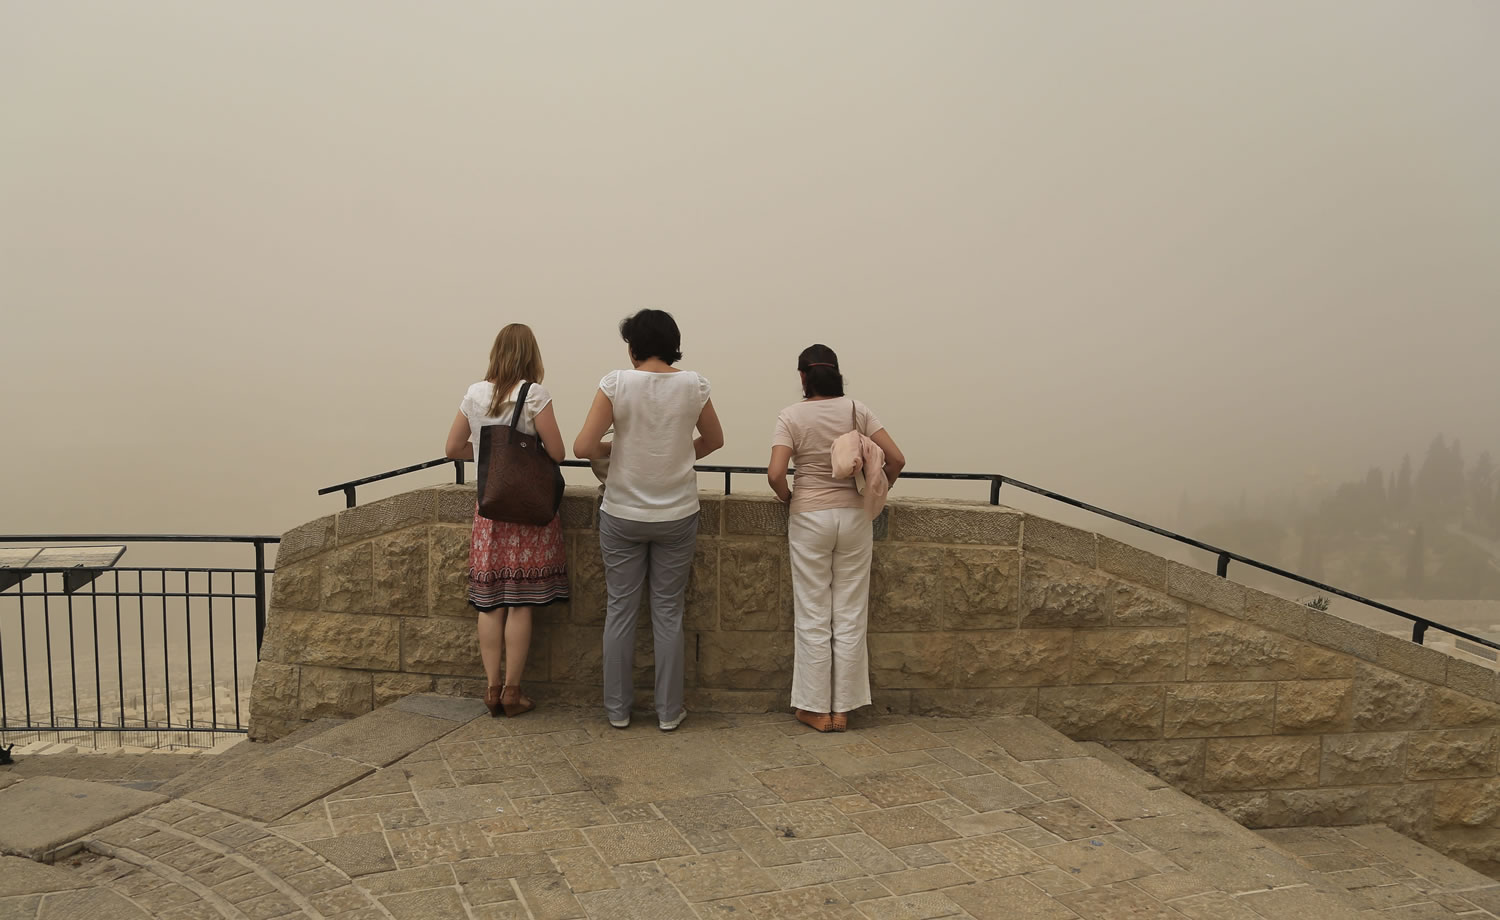 Women view scenery obscured by a sandstorm as they visit Jerusalem's Old City on Tuesday. The unseasonal sandstorm has hit the Middle East, reducing visibility and sending hundreds to hospitals with breathing difficulties.